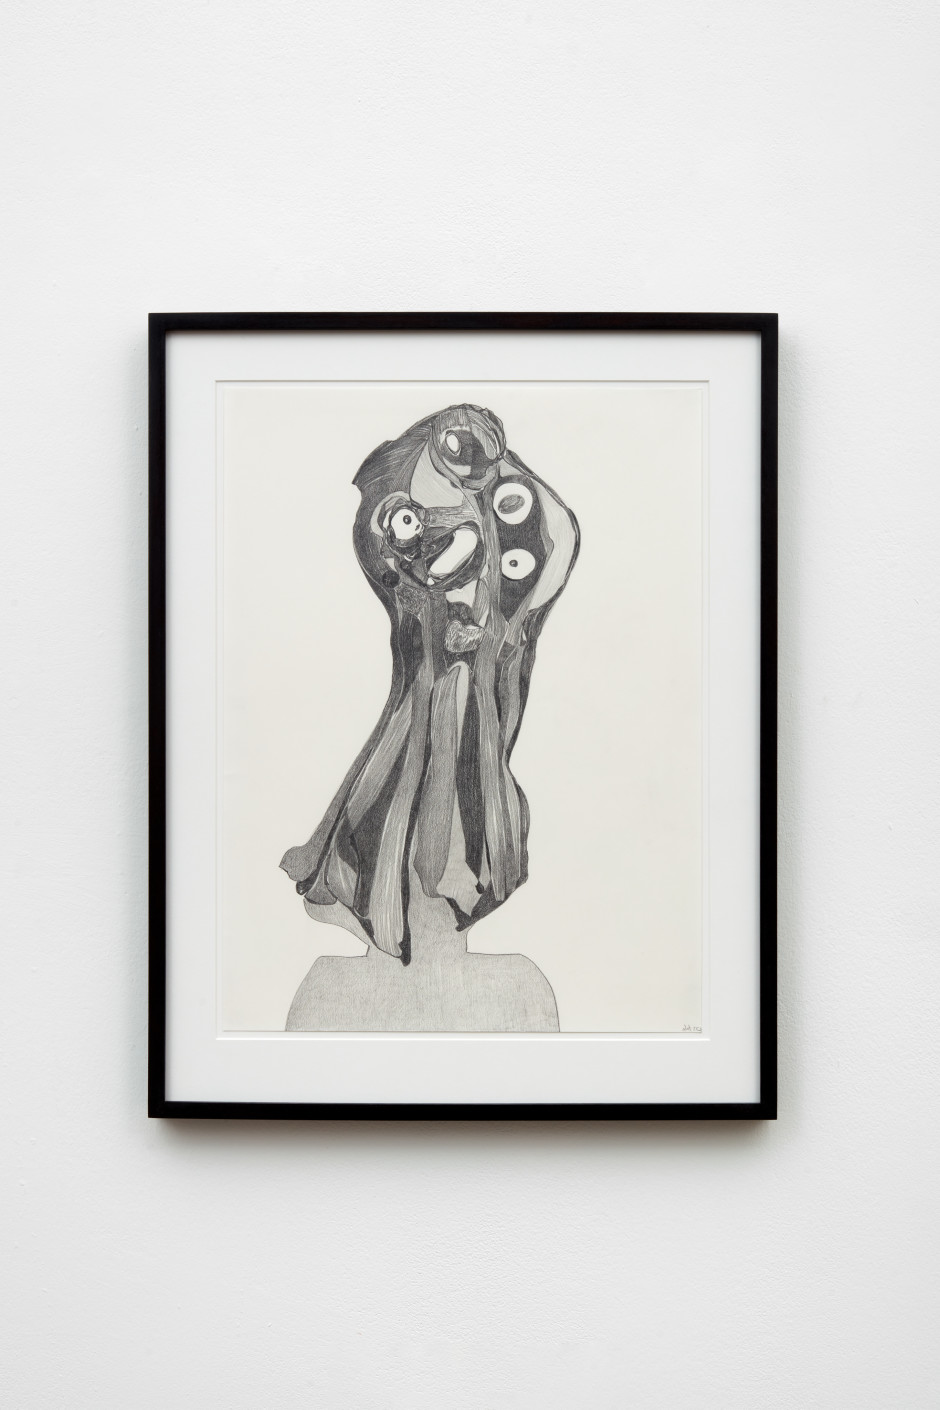 Virgin and Child, 2020  graphite on paper  site size: 50.8 x 37.5 cm / 20 x 14 ¾ in frame size: 63.5 x 49 x 3.8 cm / 25 x 19 ¼ x 1 ½ in